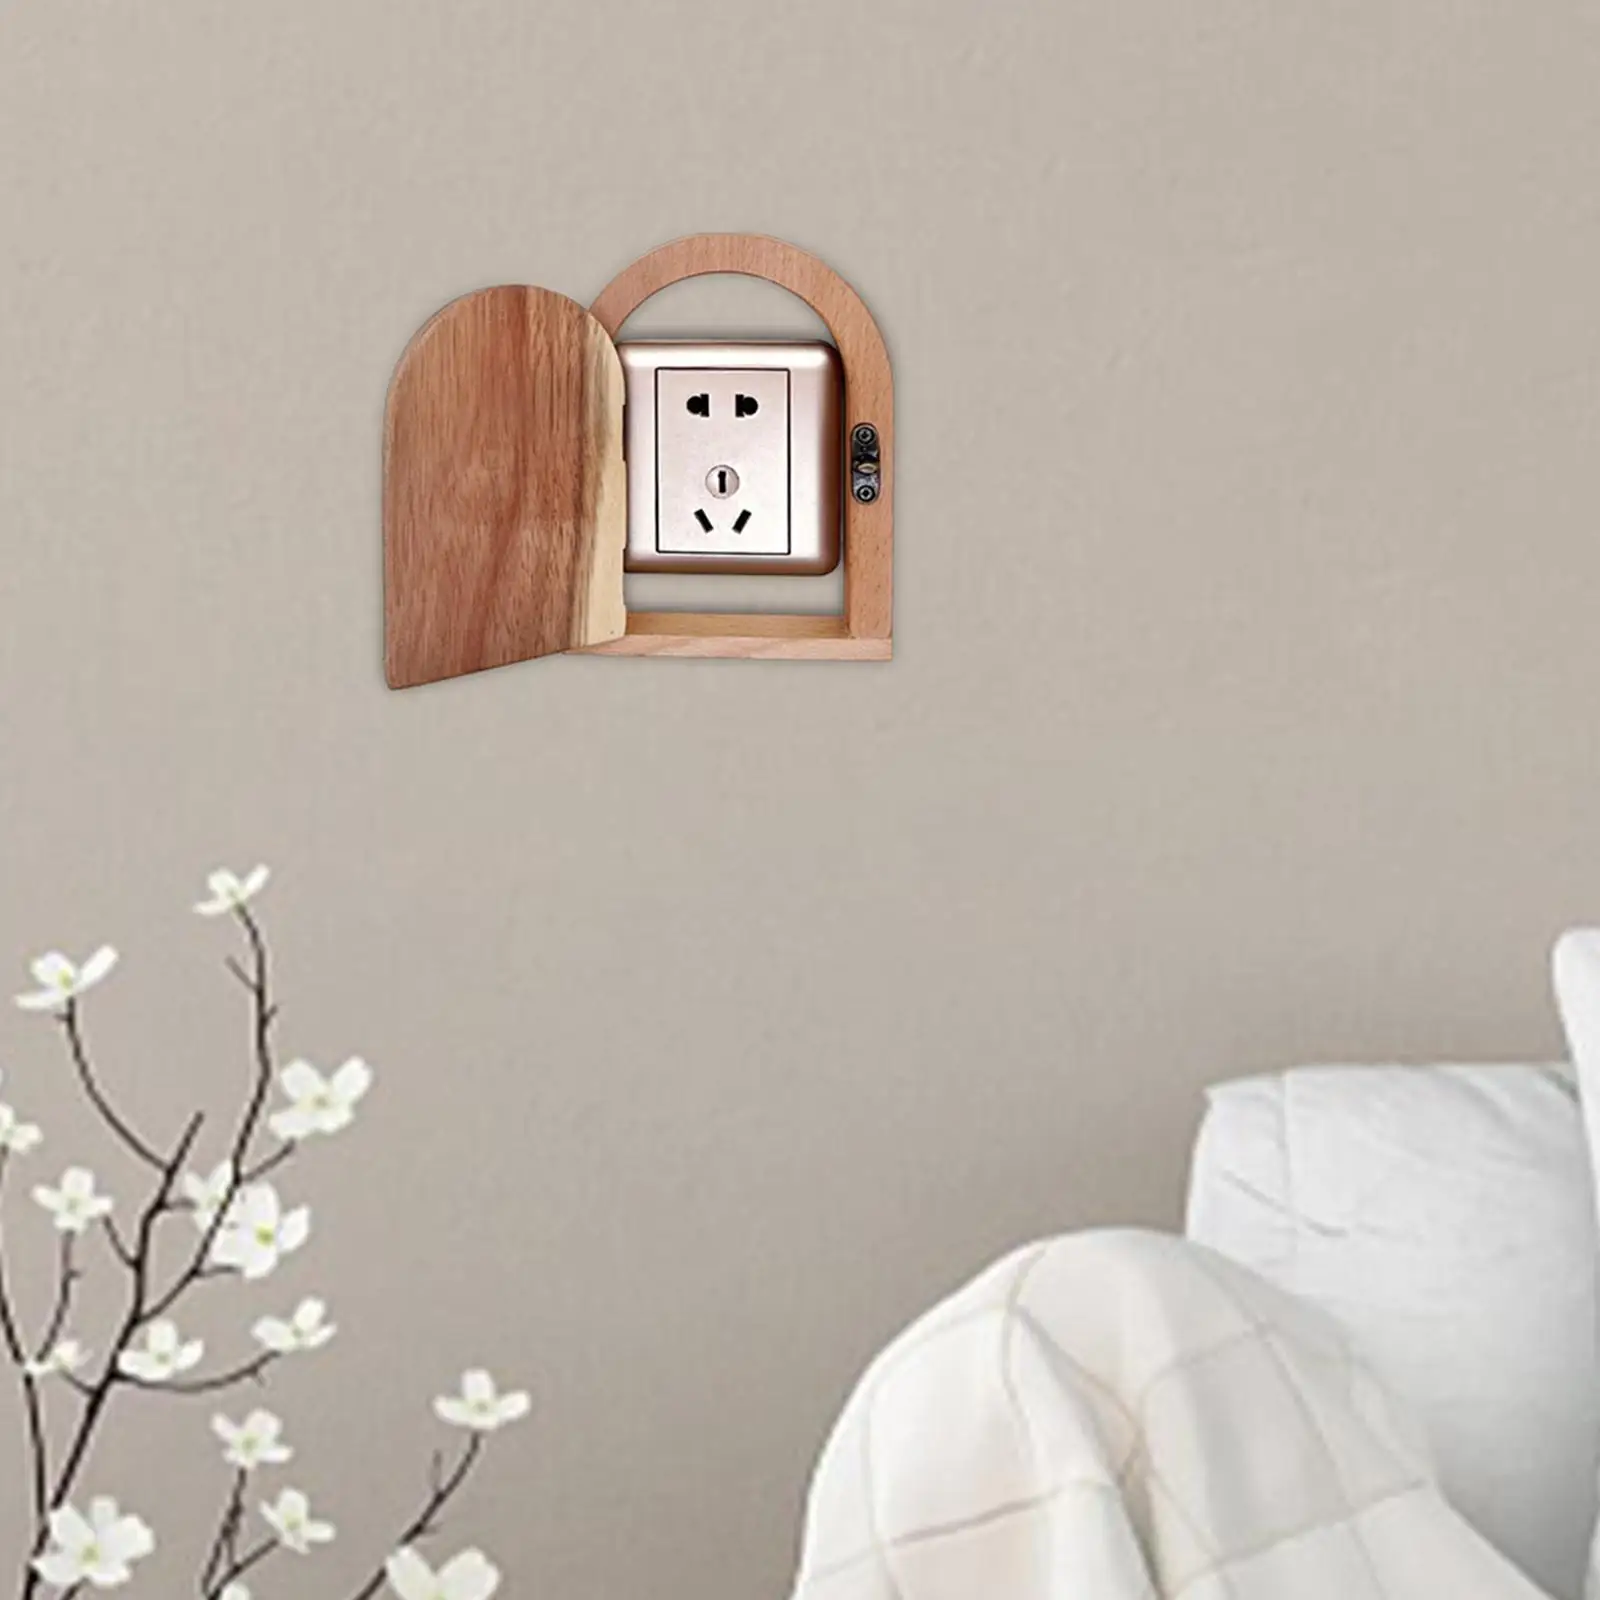 Outlet Covers Wood Wall Socket Box Dustproof Switch Cover Socket Protectors Outlet Box for Office Home Restaurant Wall Workshop